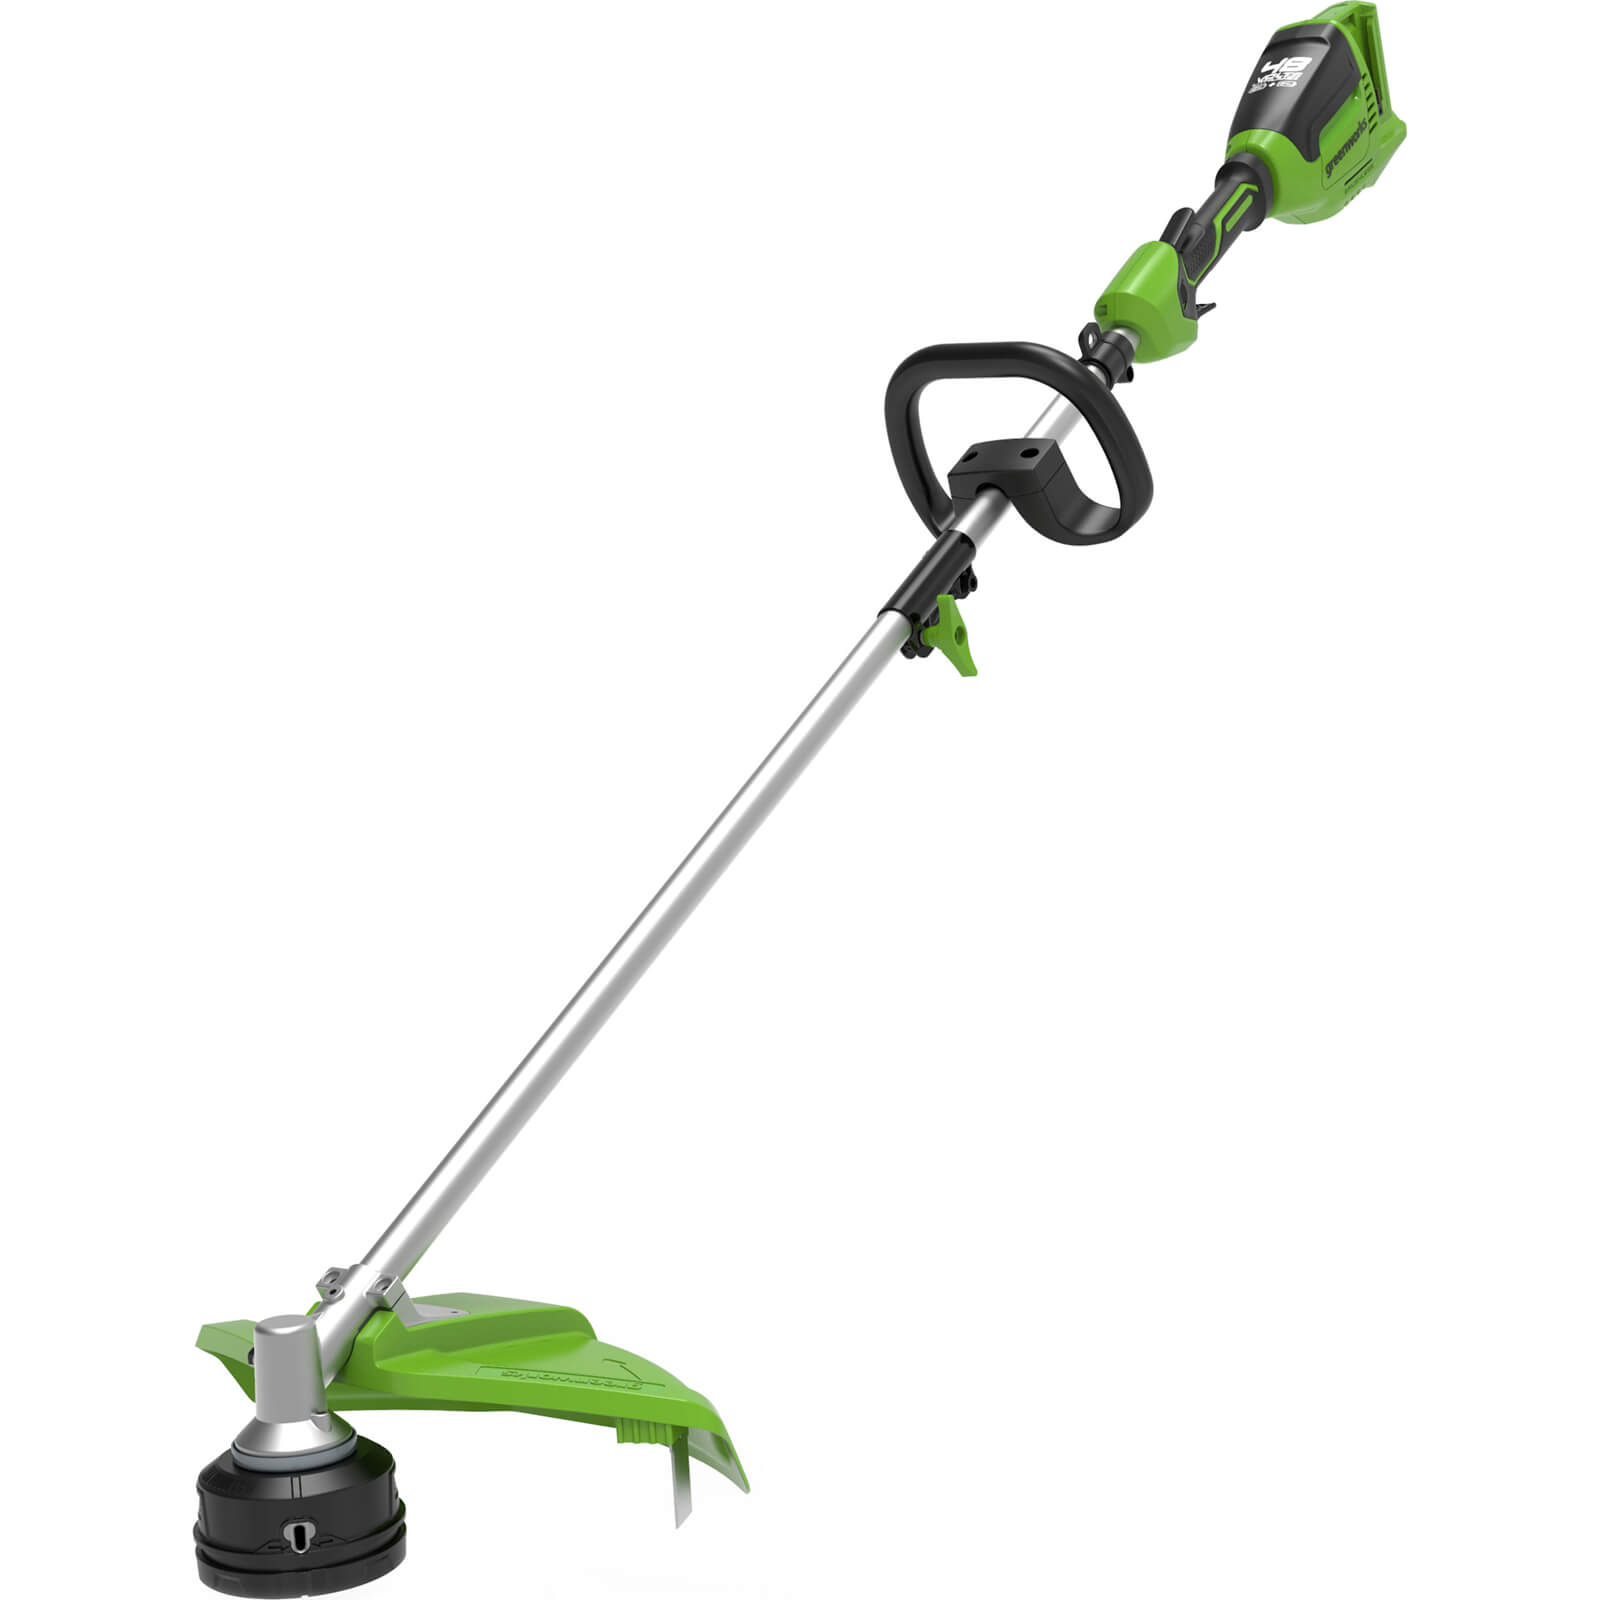 Greenworks GD24X2TX 48v Cordless Brushless Grass Trimmer 400mm (Attachment Compatible) No Batteries No Charger